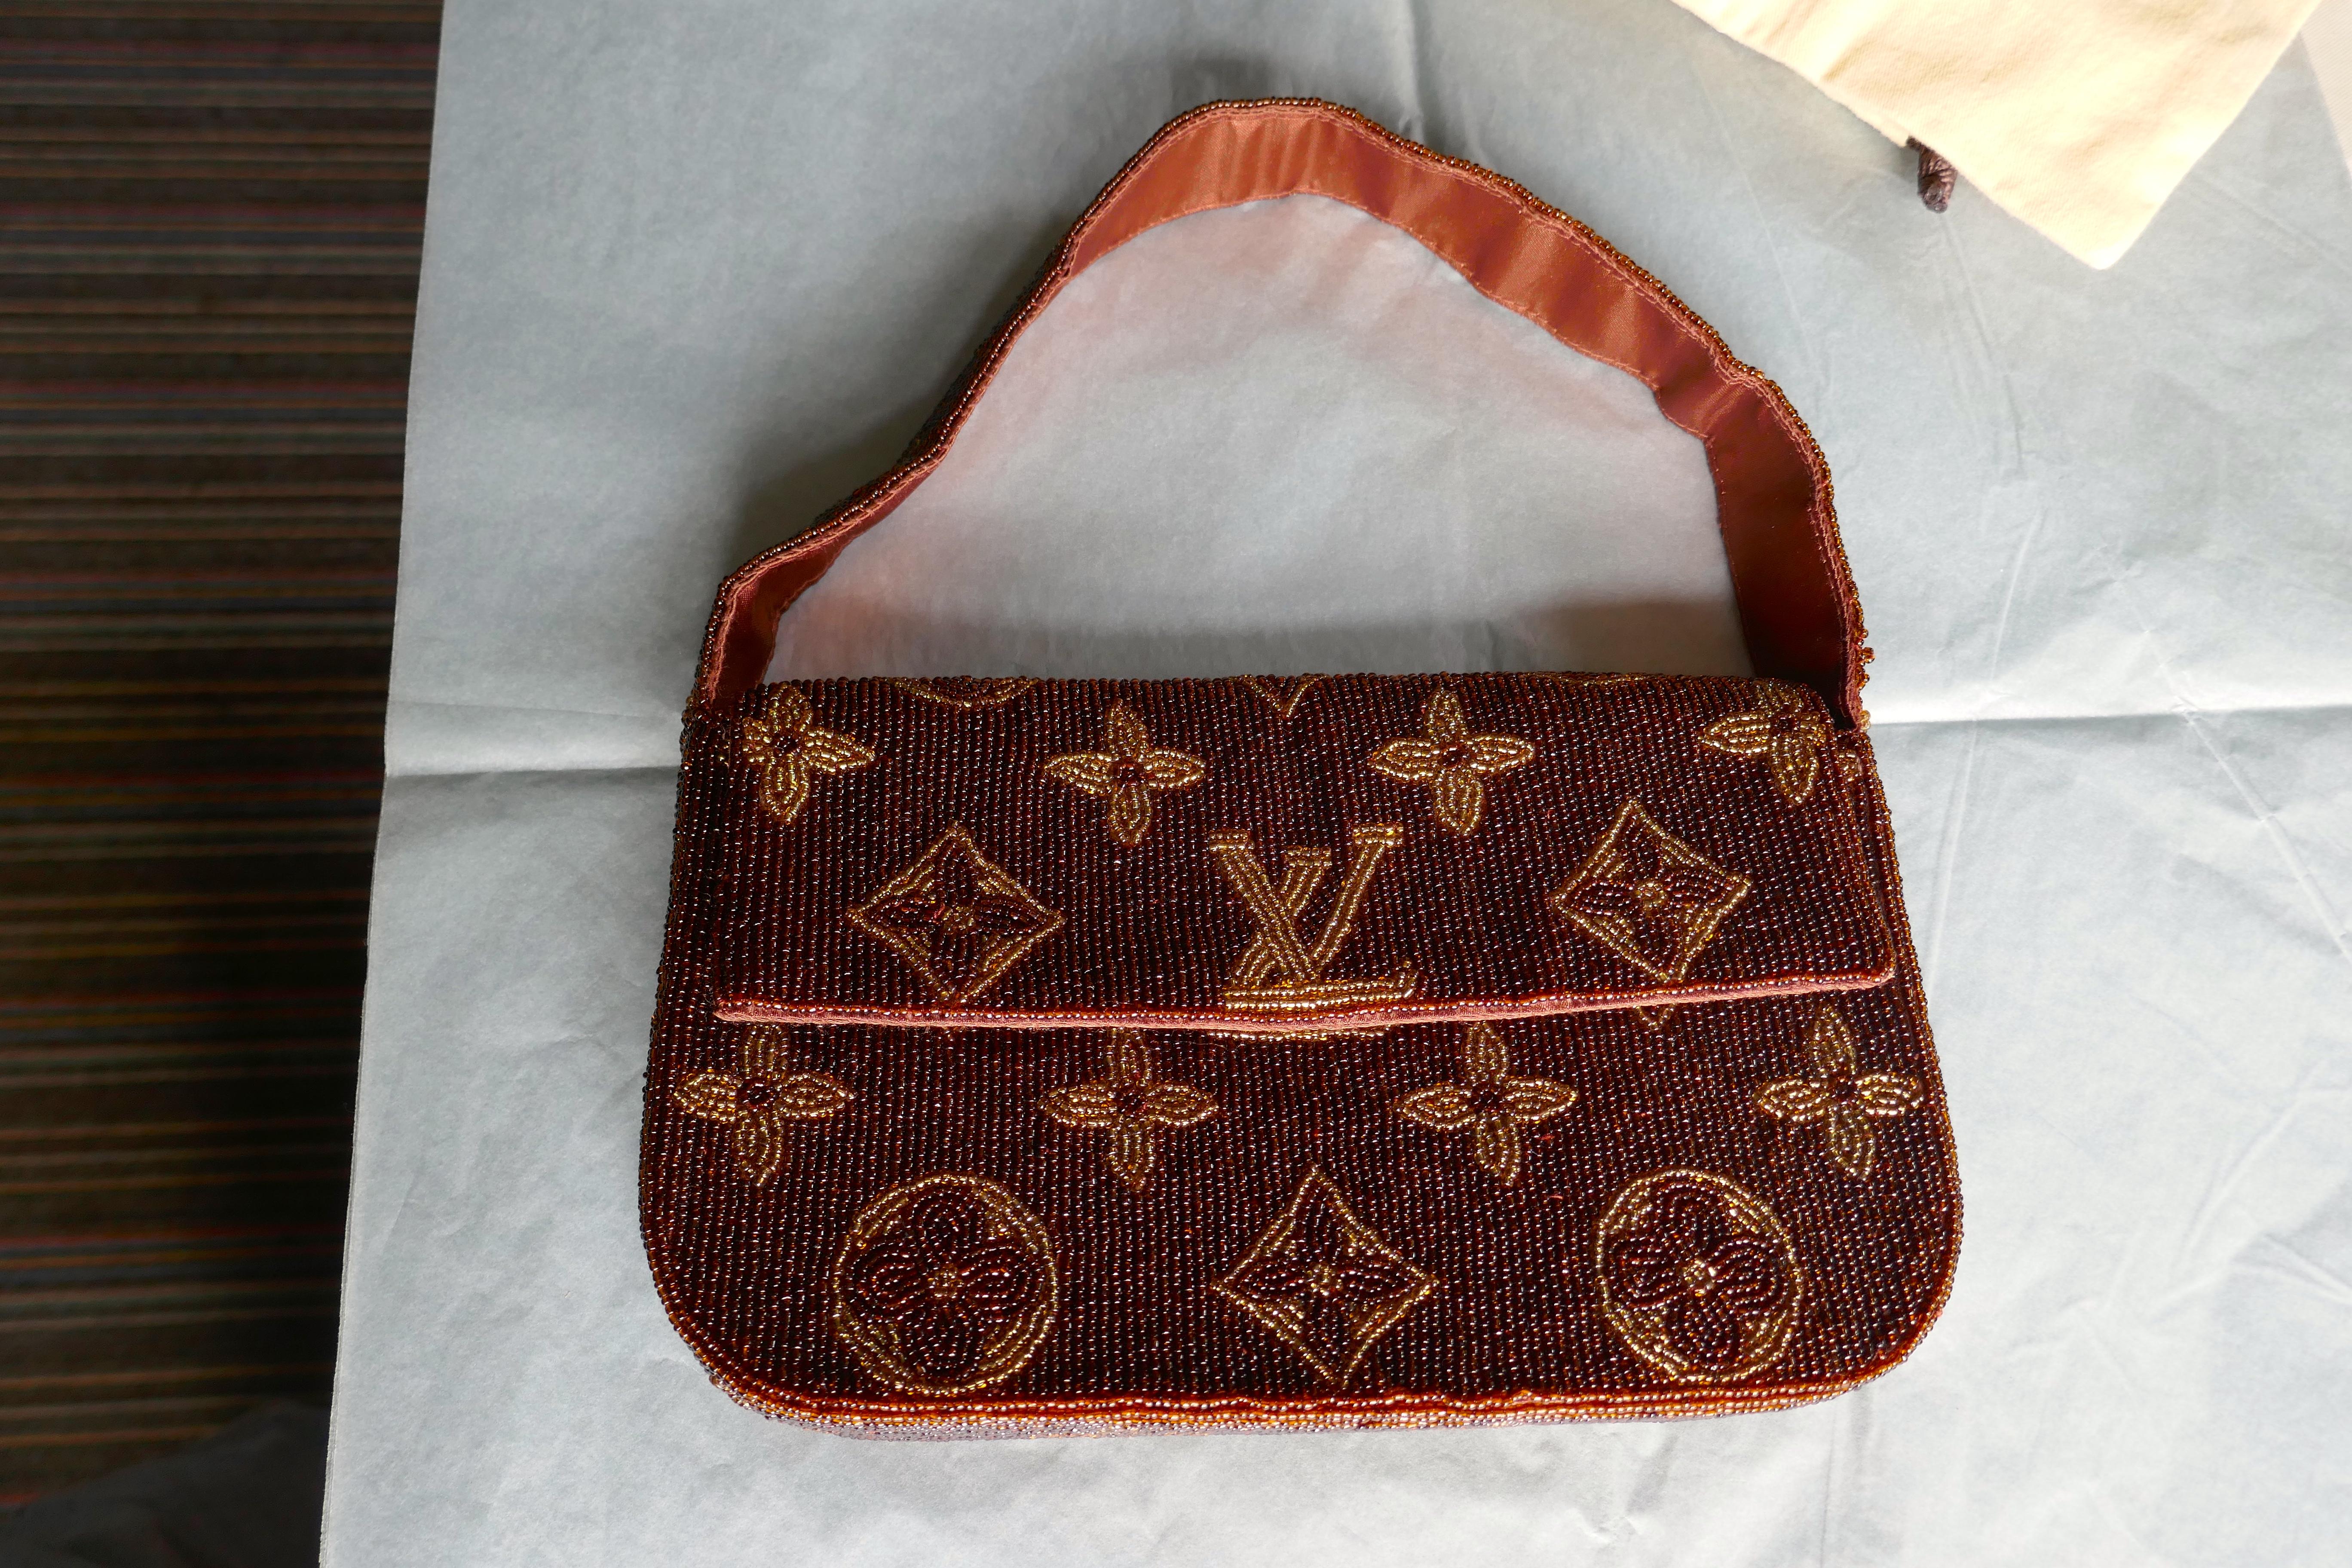 Louis Vuitton Monogram Limited Edition Bead Work Evening Handbag.

This very rare piece dates from the 1970s, the bag is made in Bronze and Gold glass beadwork with the LV monograms sewn in Gold, the bag and its handle are lined in matching Bronze